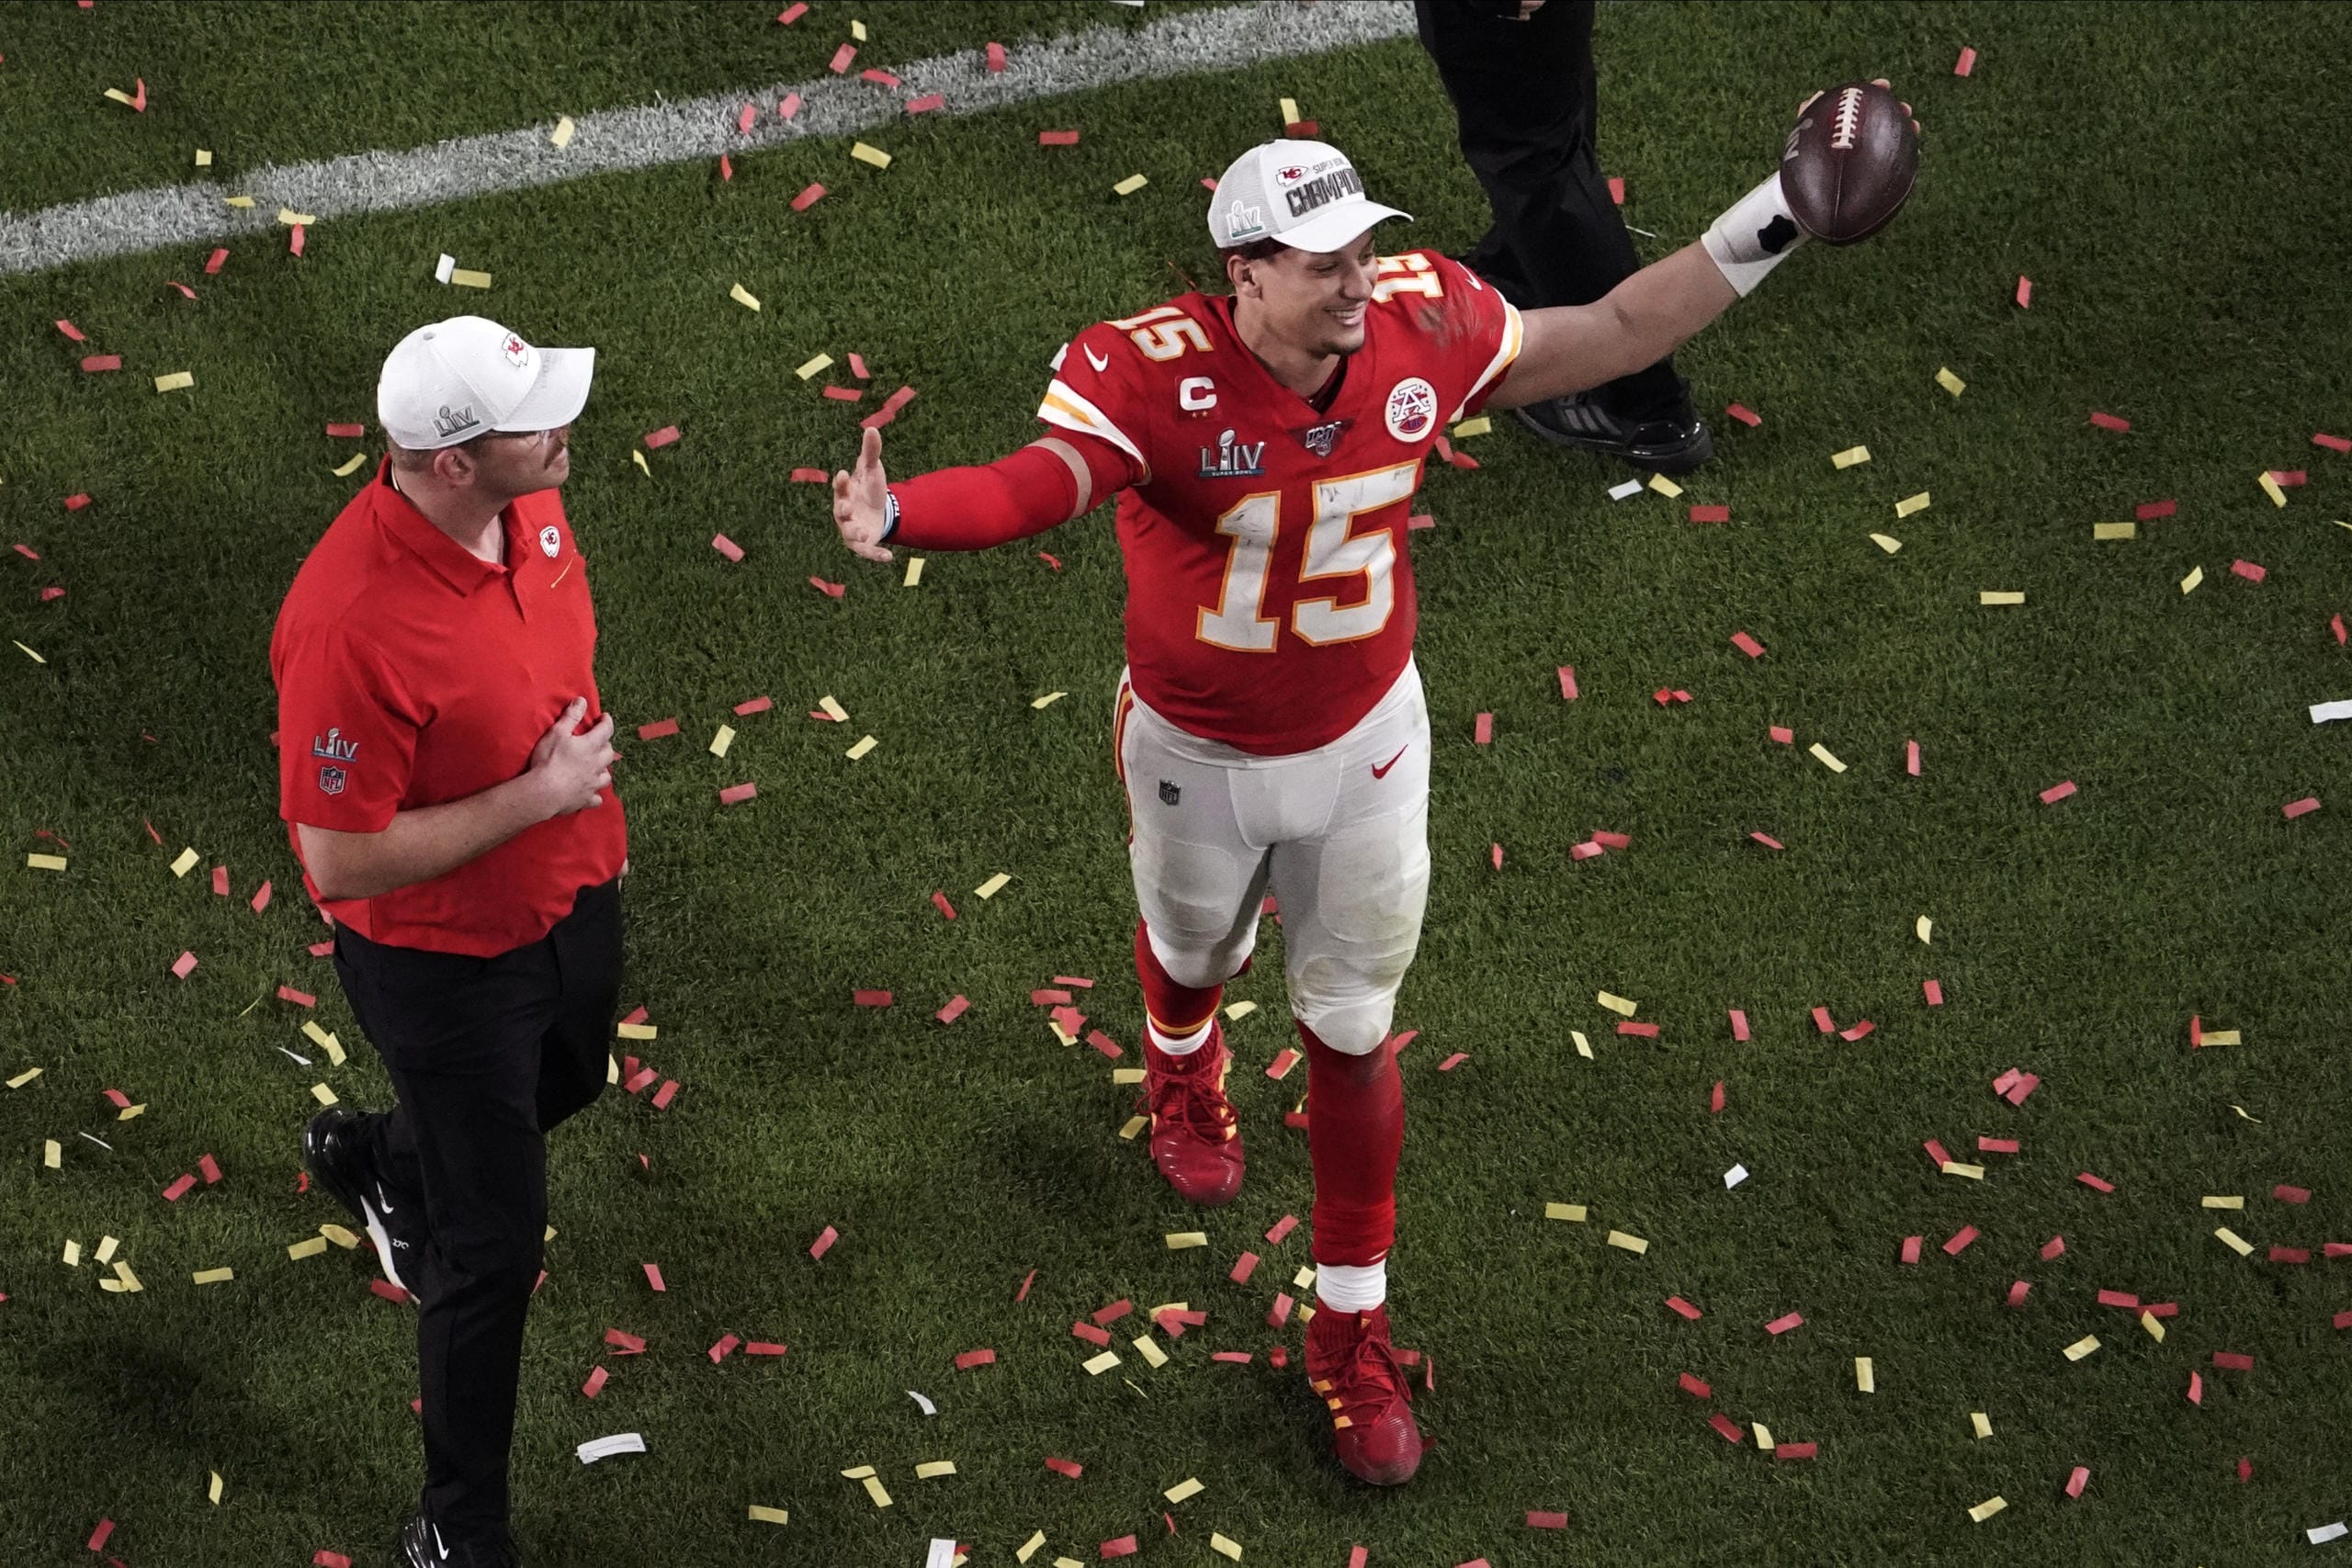 Kansas City Chiefs quarterback Patrick Mahomes (15) raises his arms after his team won the NFL Super Bowl 54 football game against the San Francisco 49ers, Sunday, Feb. 2, 2020, in Miami Gardens, Fla. The Chiefs' defeated the 49ers 31-20.